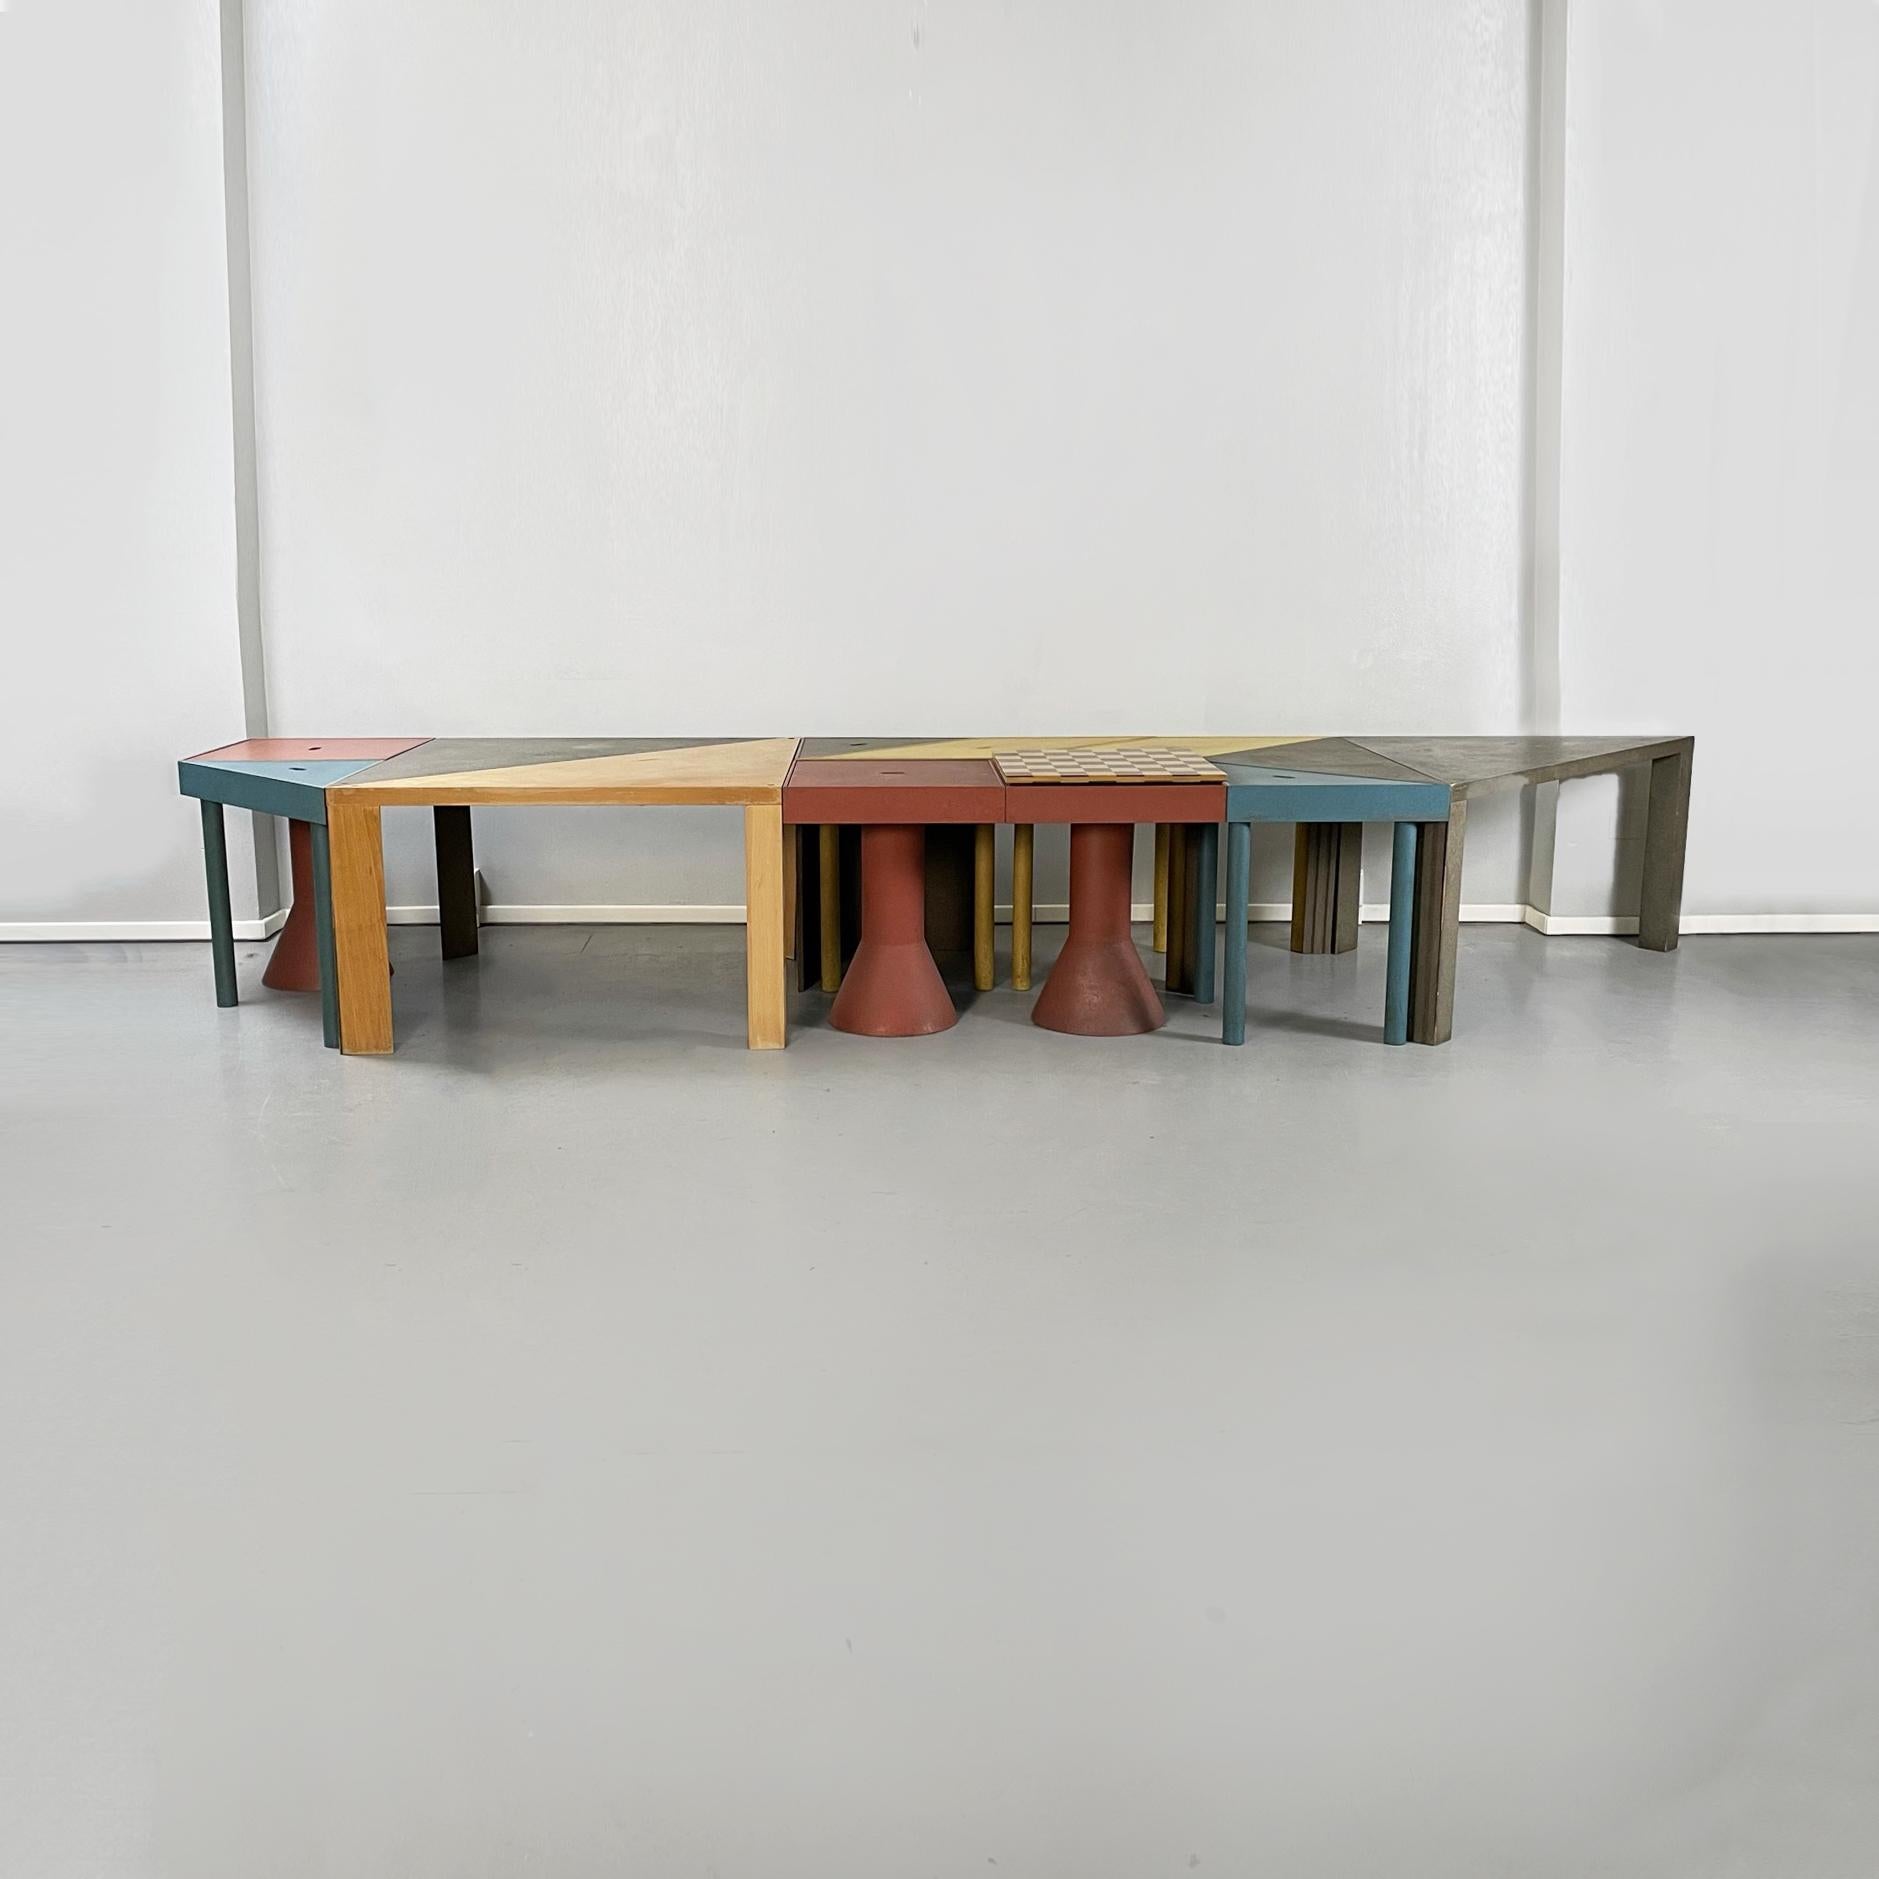 Italian mid-century Tangram modular table by Massimo Morozzi for Cassina, 1990s
Tangram modular table consisting of thirteen wooden pieces: three red squares, two large gray triangles, a wood-colored triangle, two blue right-angled triangles, a